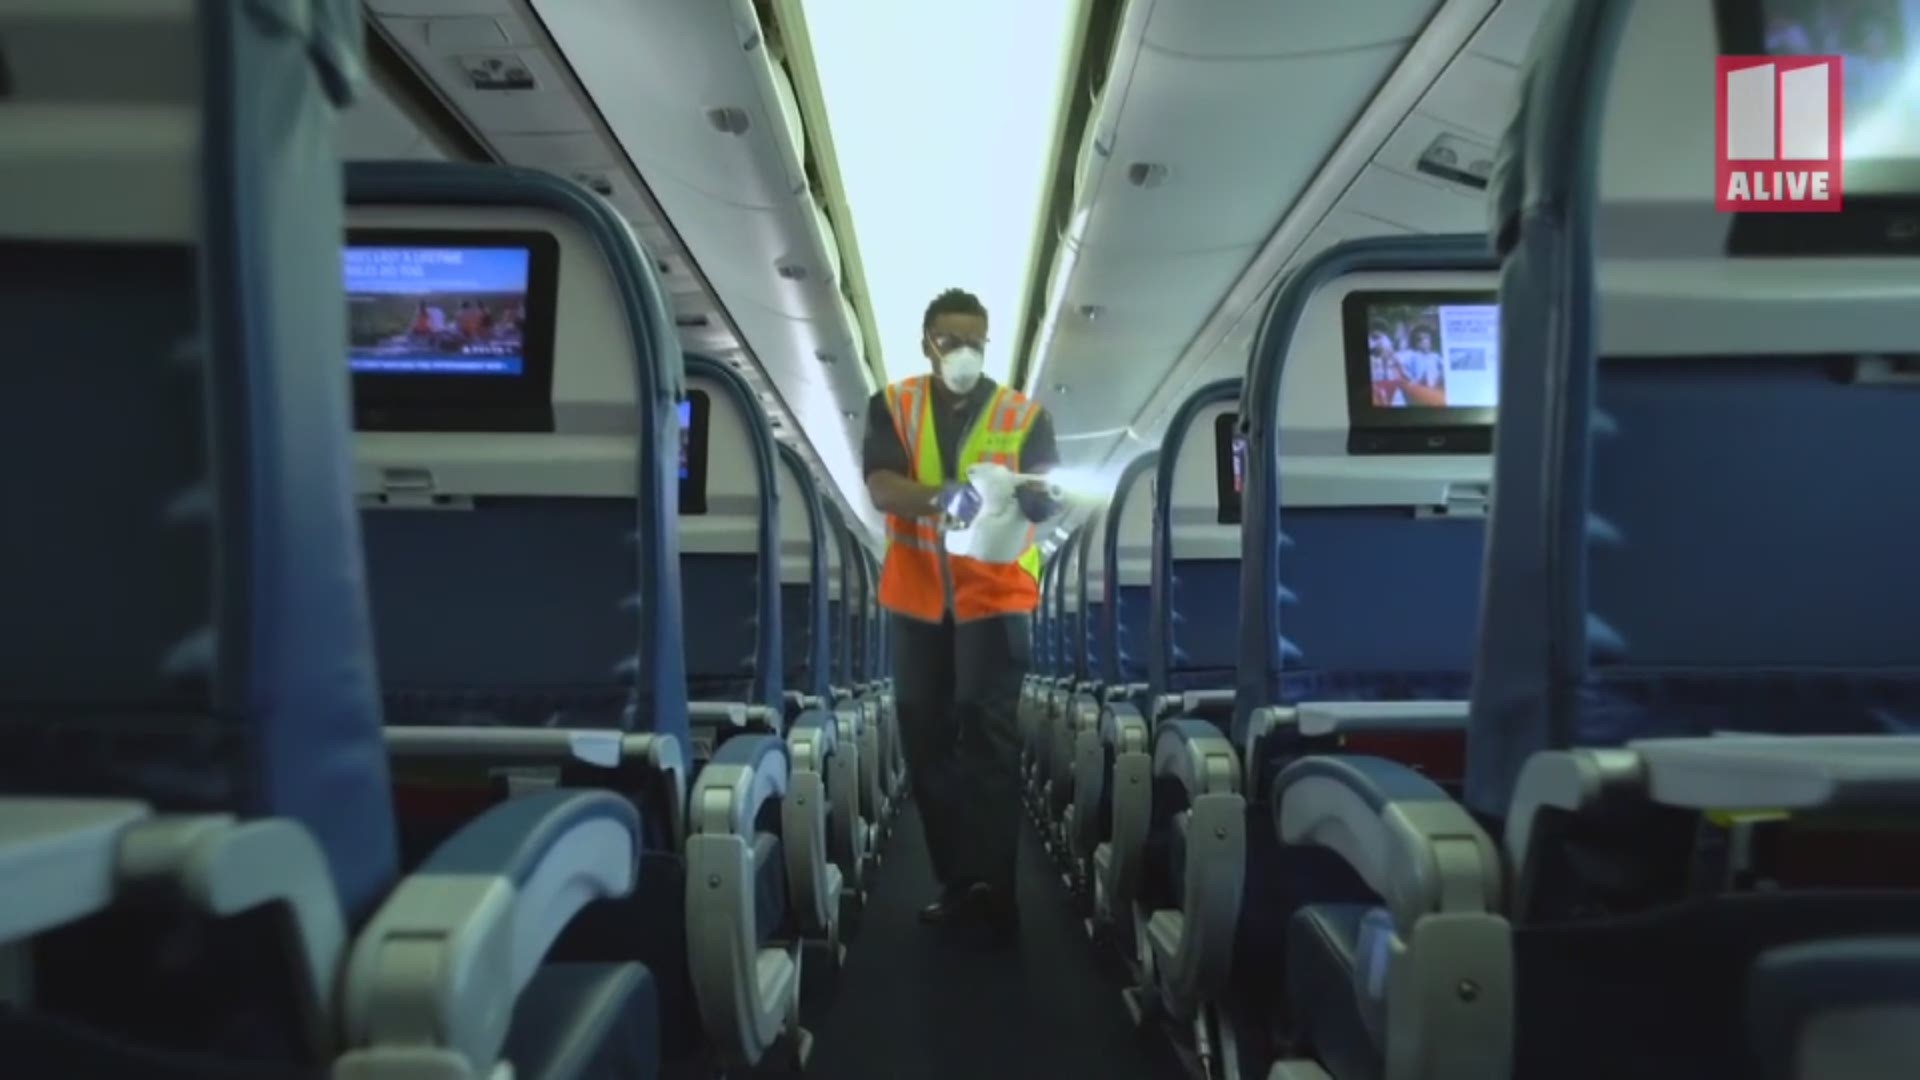 Atlanta-based Delta Air Lines says they use a high-grade, EPA-registered disinfectant on all flights, which they say is rated to combat many communicable diseases.